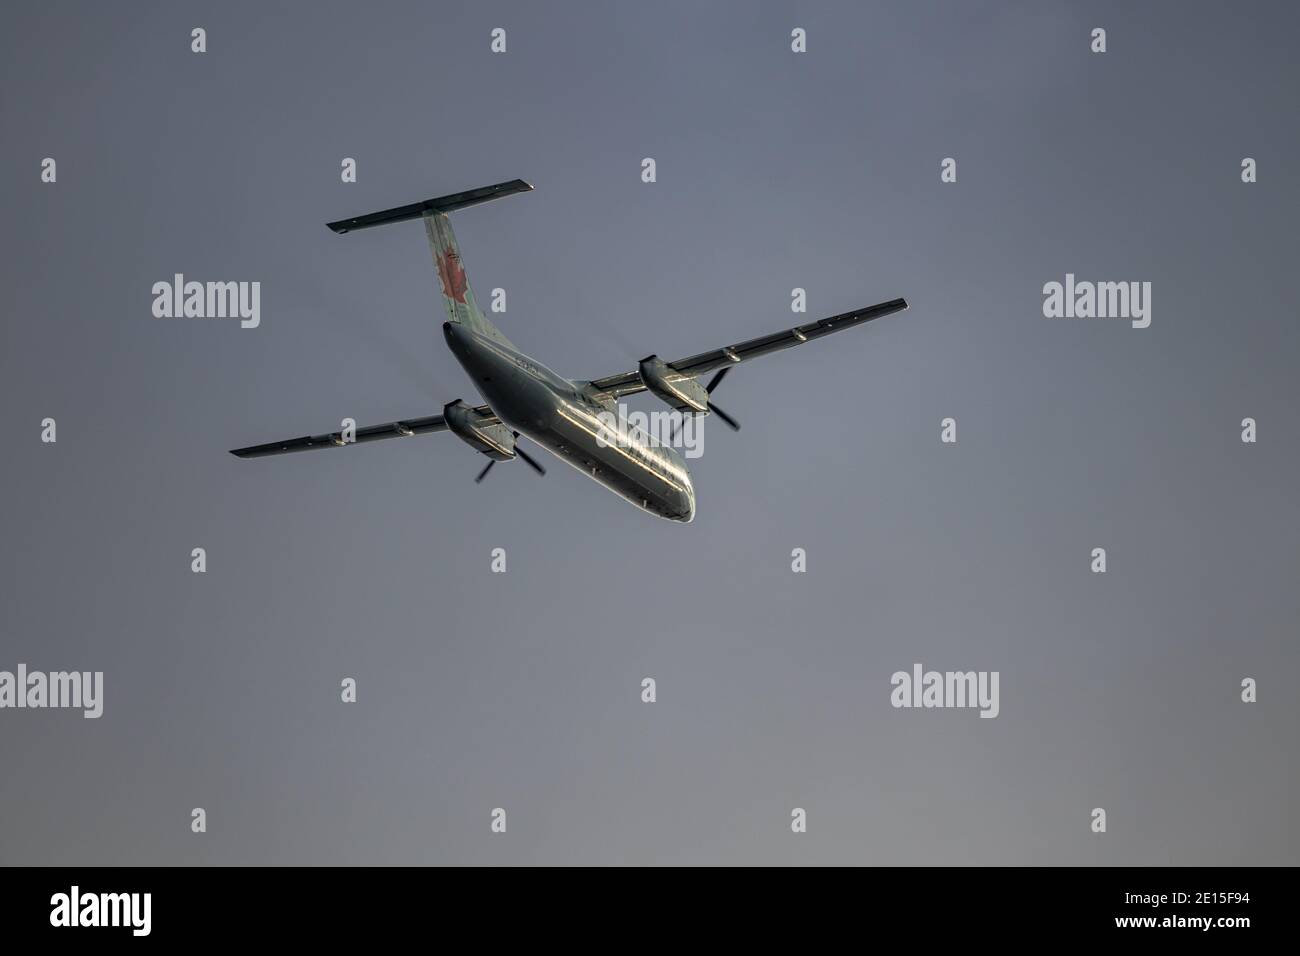 Montreal, Quebec/ Canada - 11/29/2020 : Air Canada Express Dash 8-300 taking off from Montreals Intl. Airport. Stock Photo